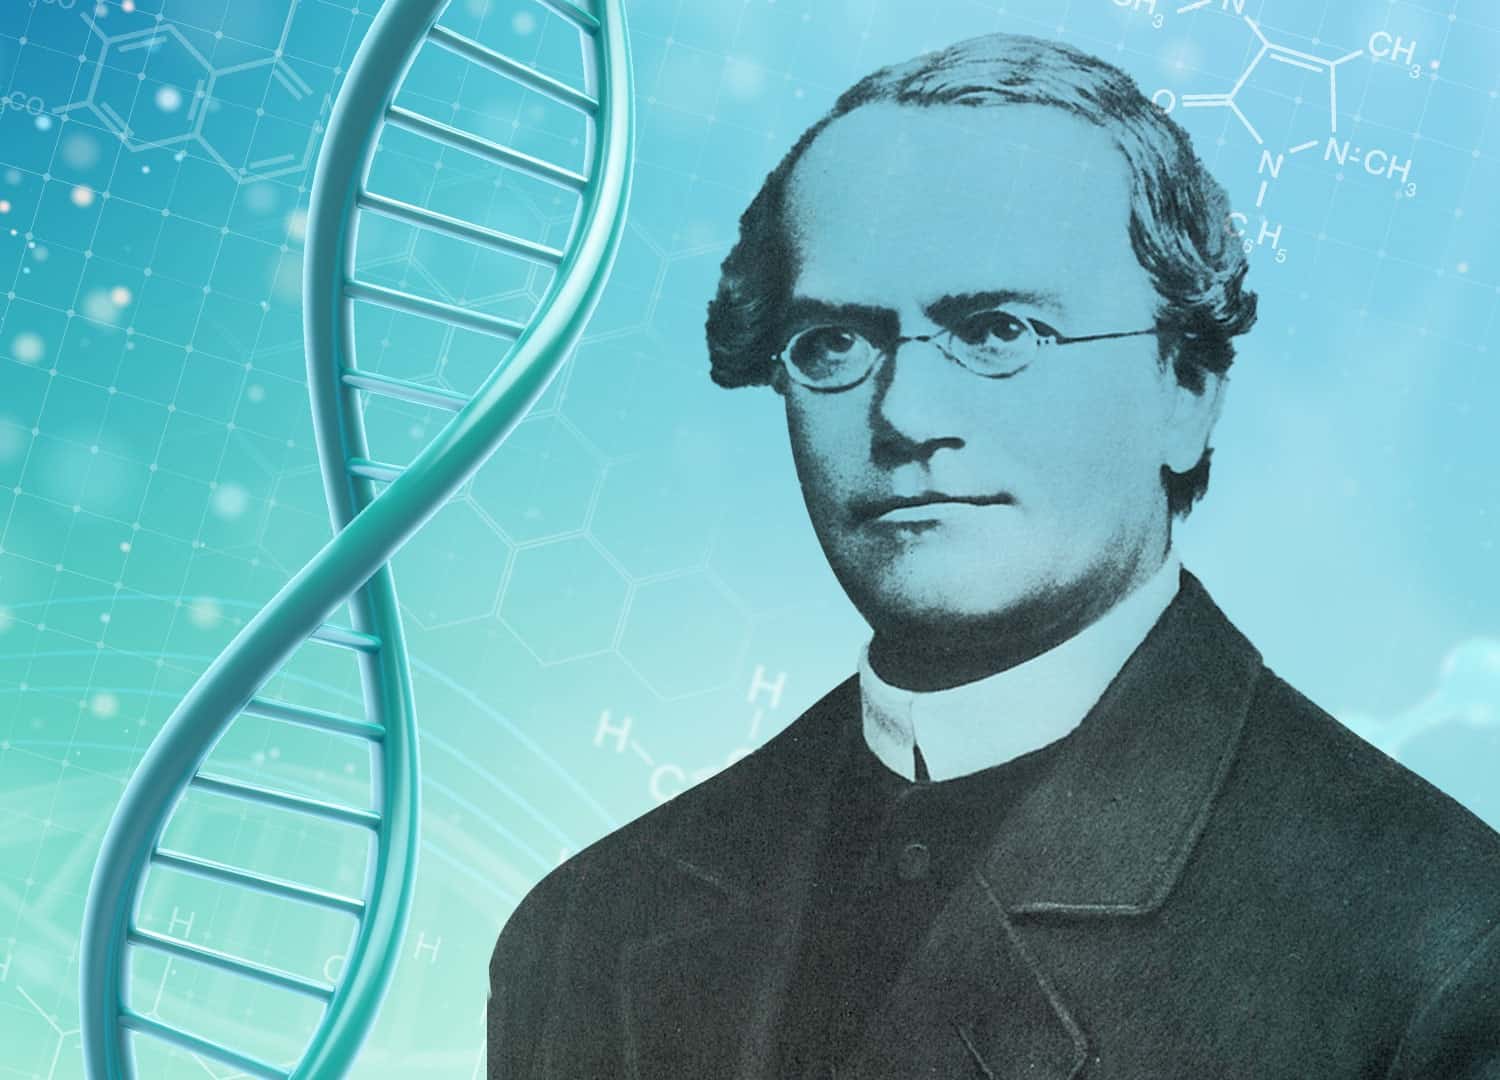 NRGene – Growing the future. Together. GREGOR MENDEL - A GENIUS FAR AHEAD OF HIS TIME - NRGene - Growing the future. Together.